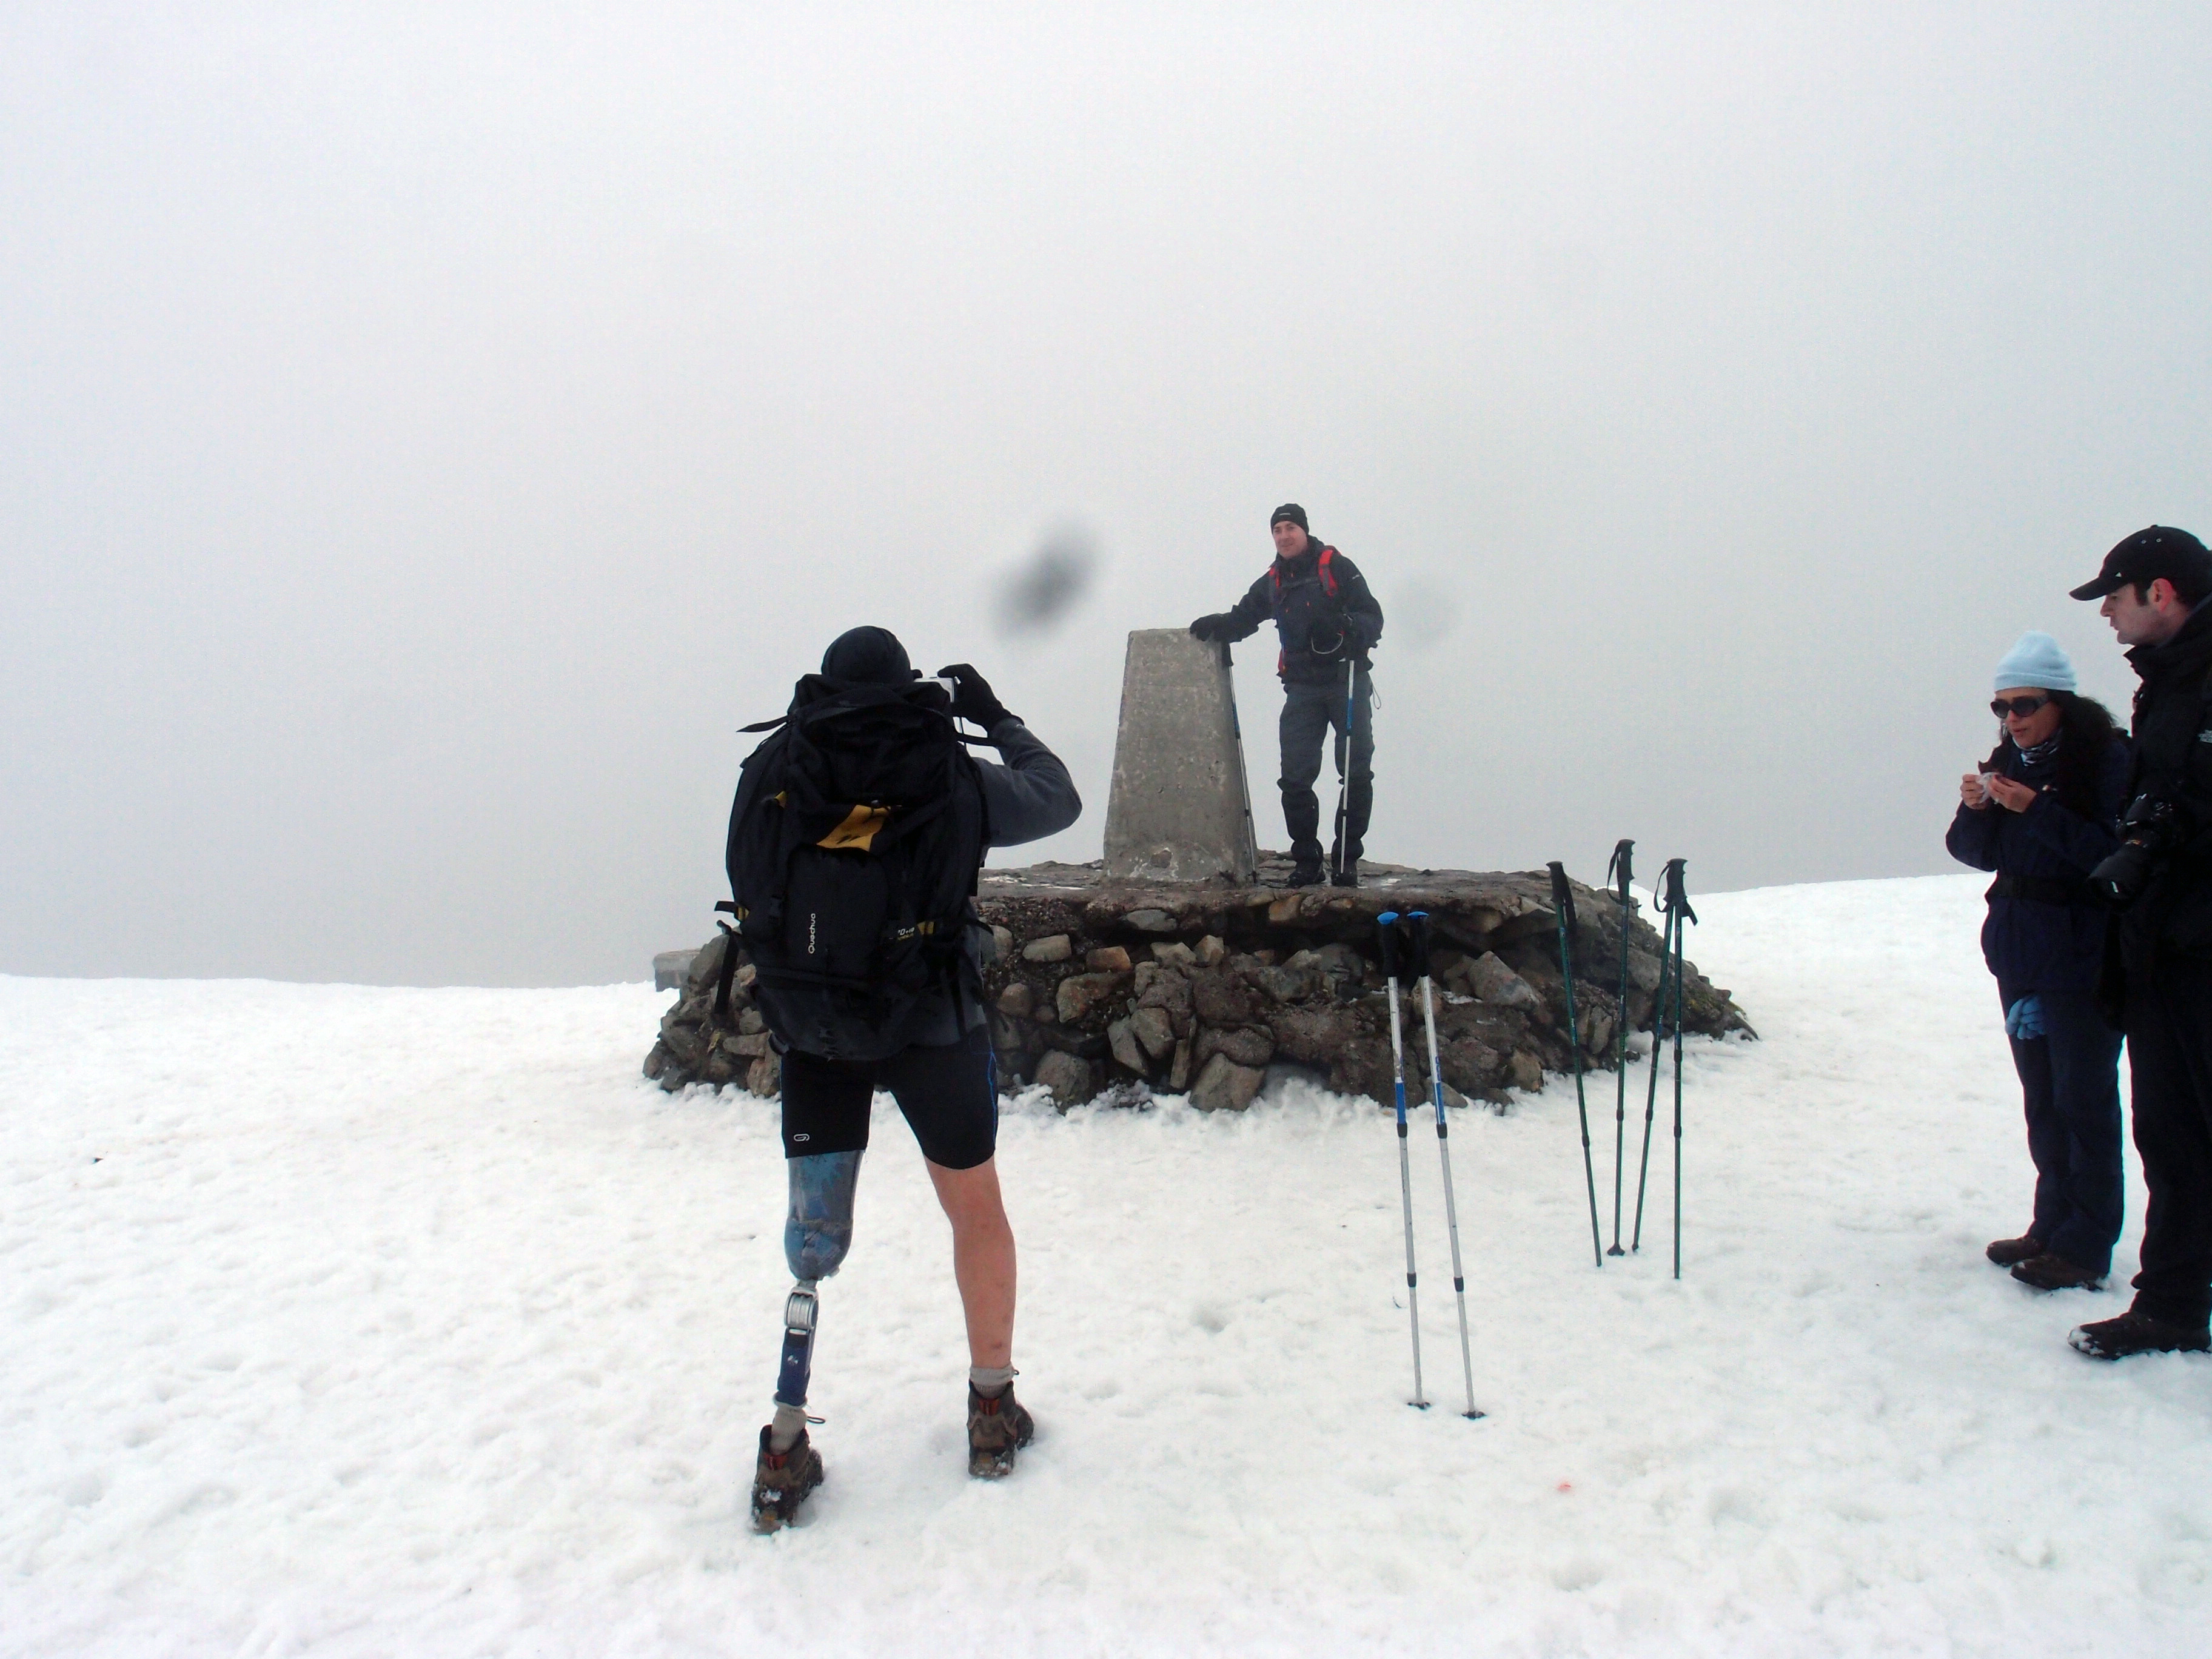 My Nevis - Martin Haigh - Frenchman at the summit